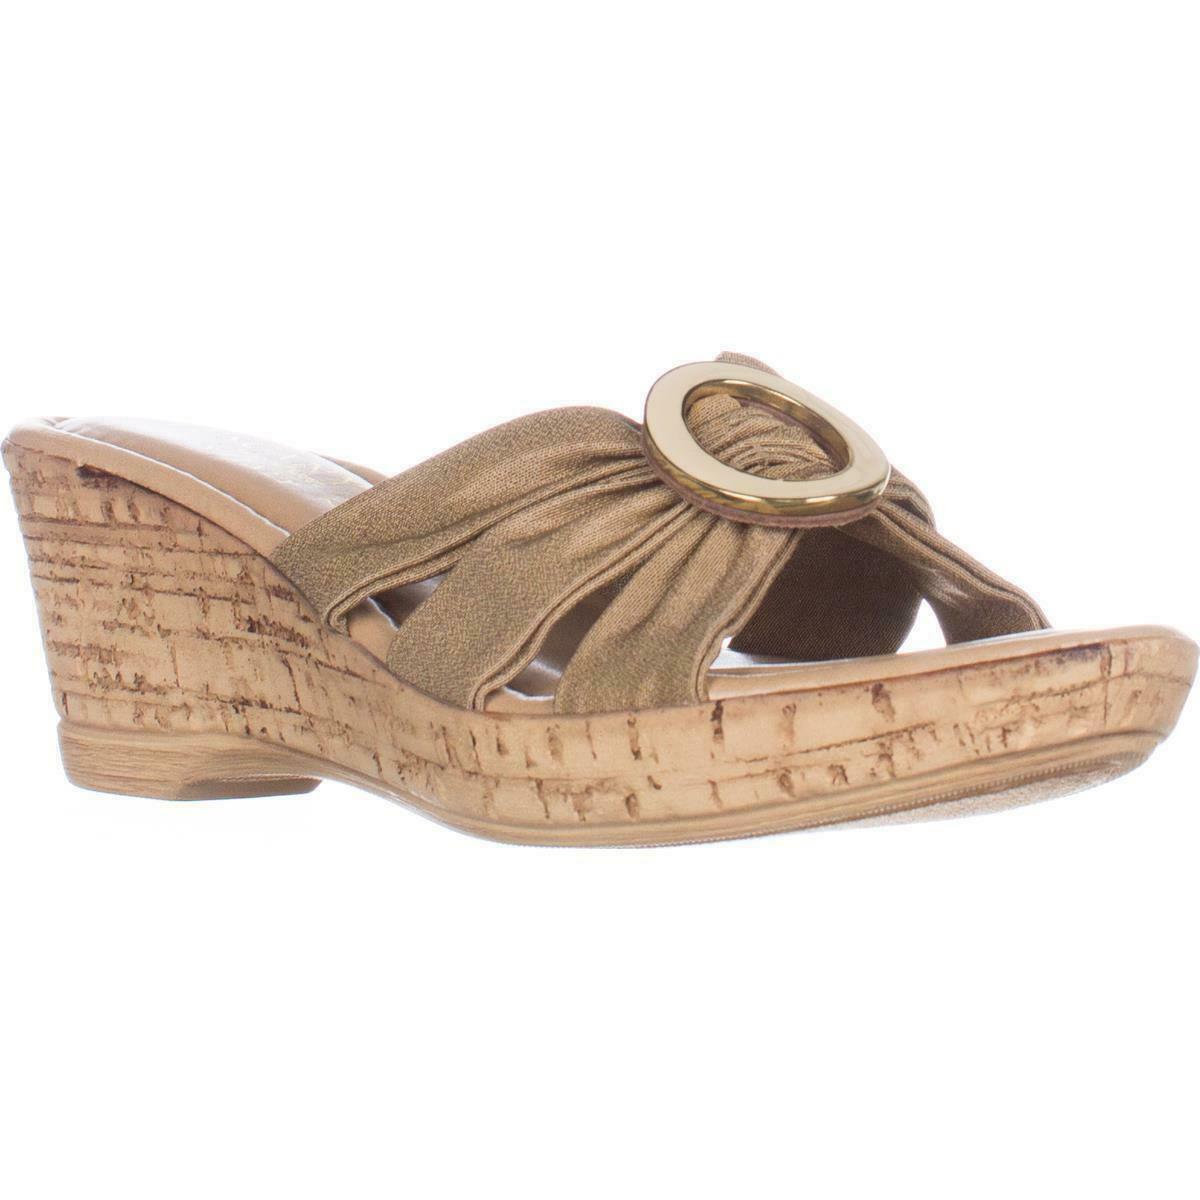 Tuscany Easy Street Conca Strappy Wedge Sandals, Natural, 7 US ...